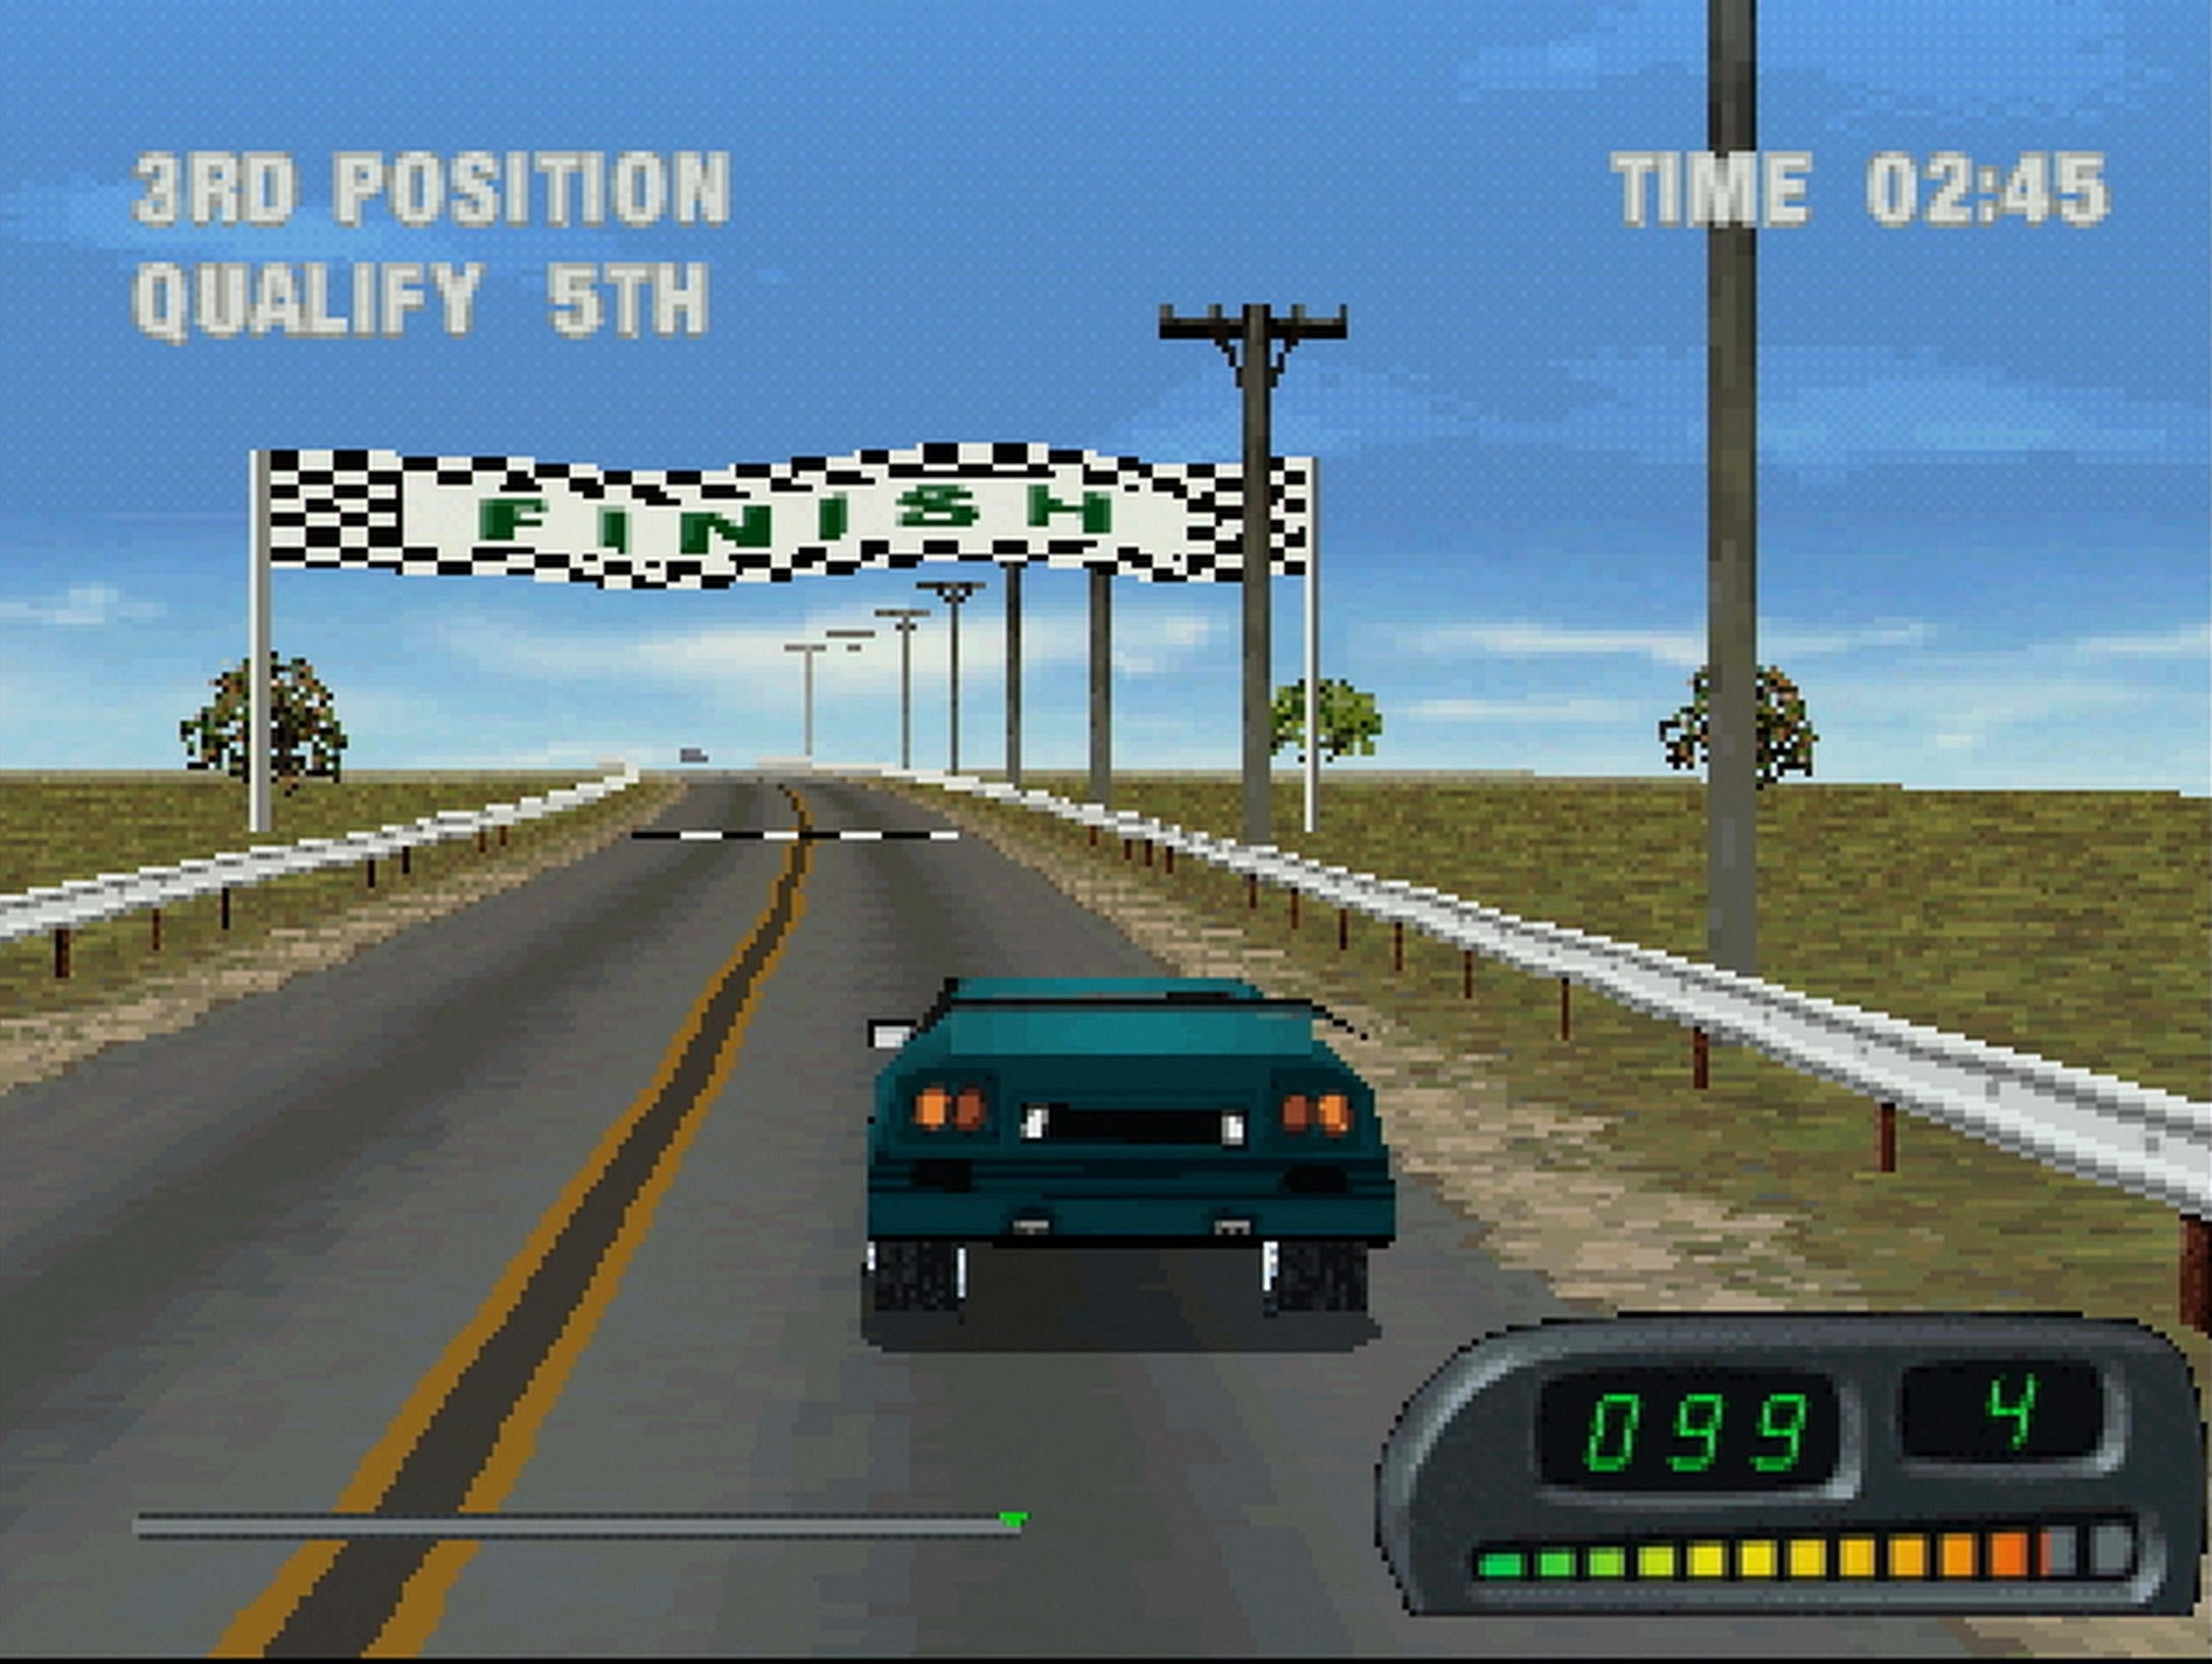 Hooters Road Trip Was the World’s Worst Racing Game